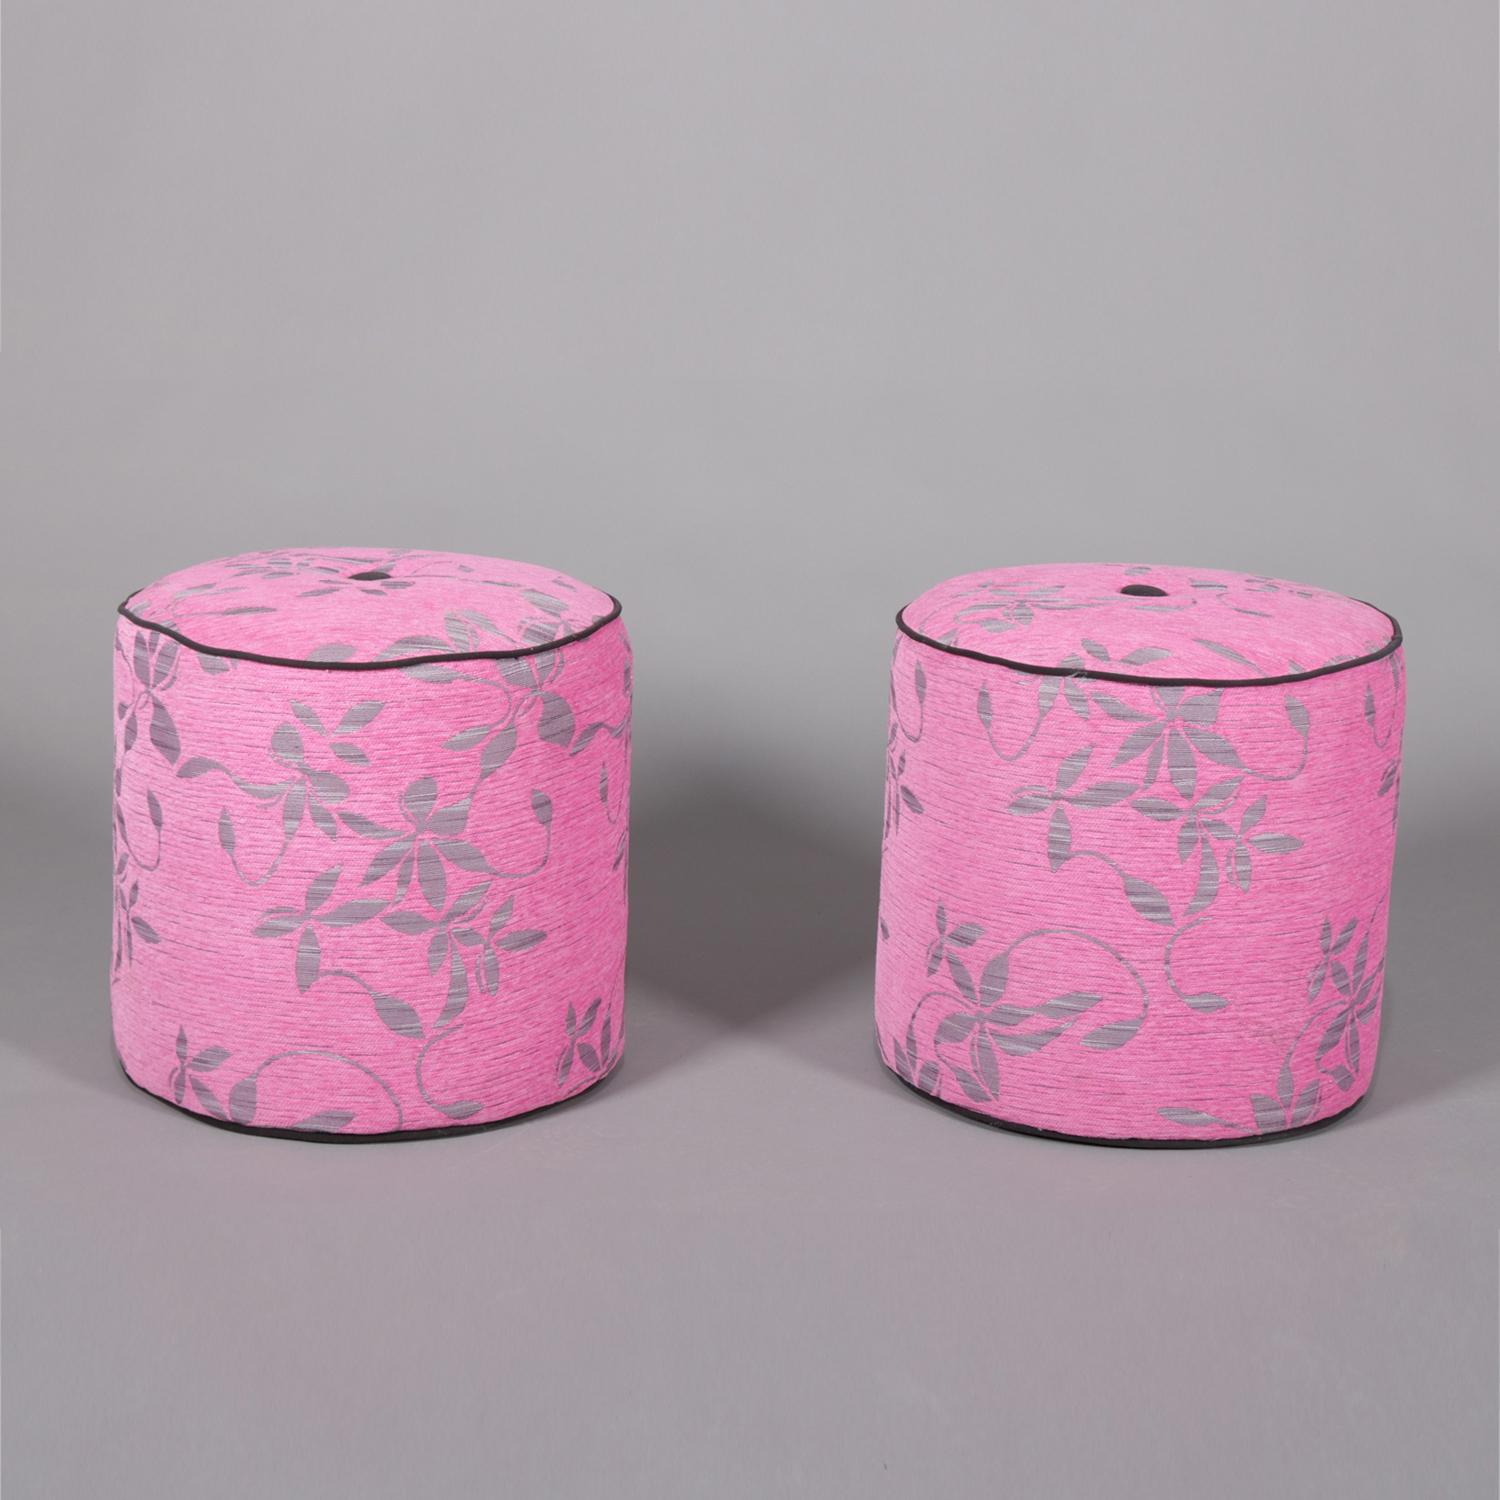 Pair of Contemporary Aesthetic Movement Style Fuschia Upholstered Ottomans (Französisch)